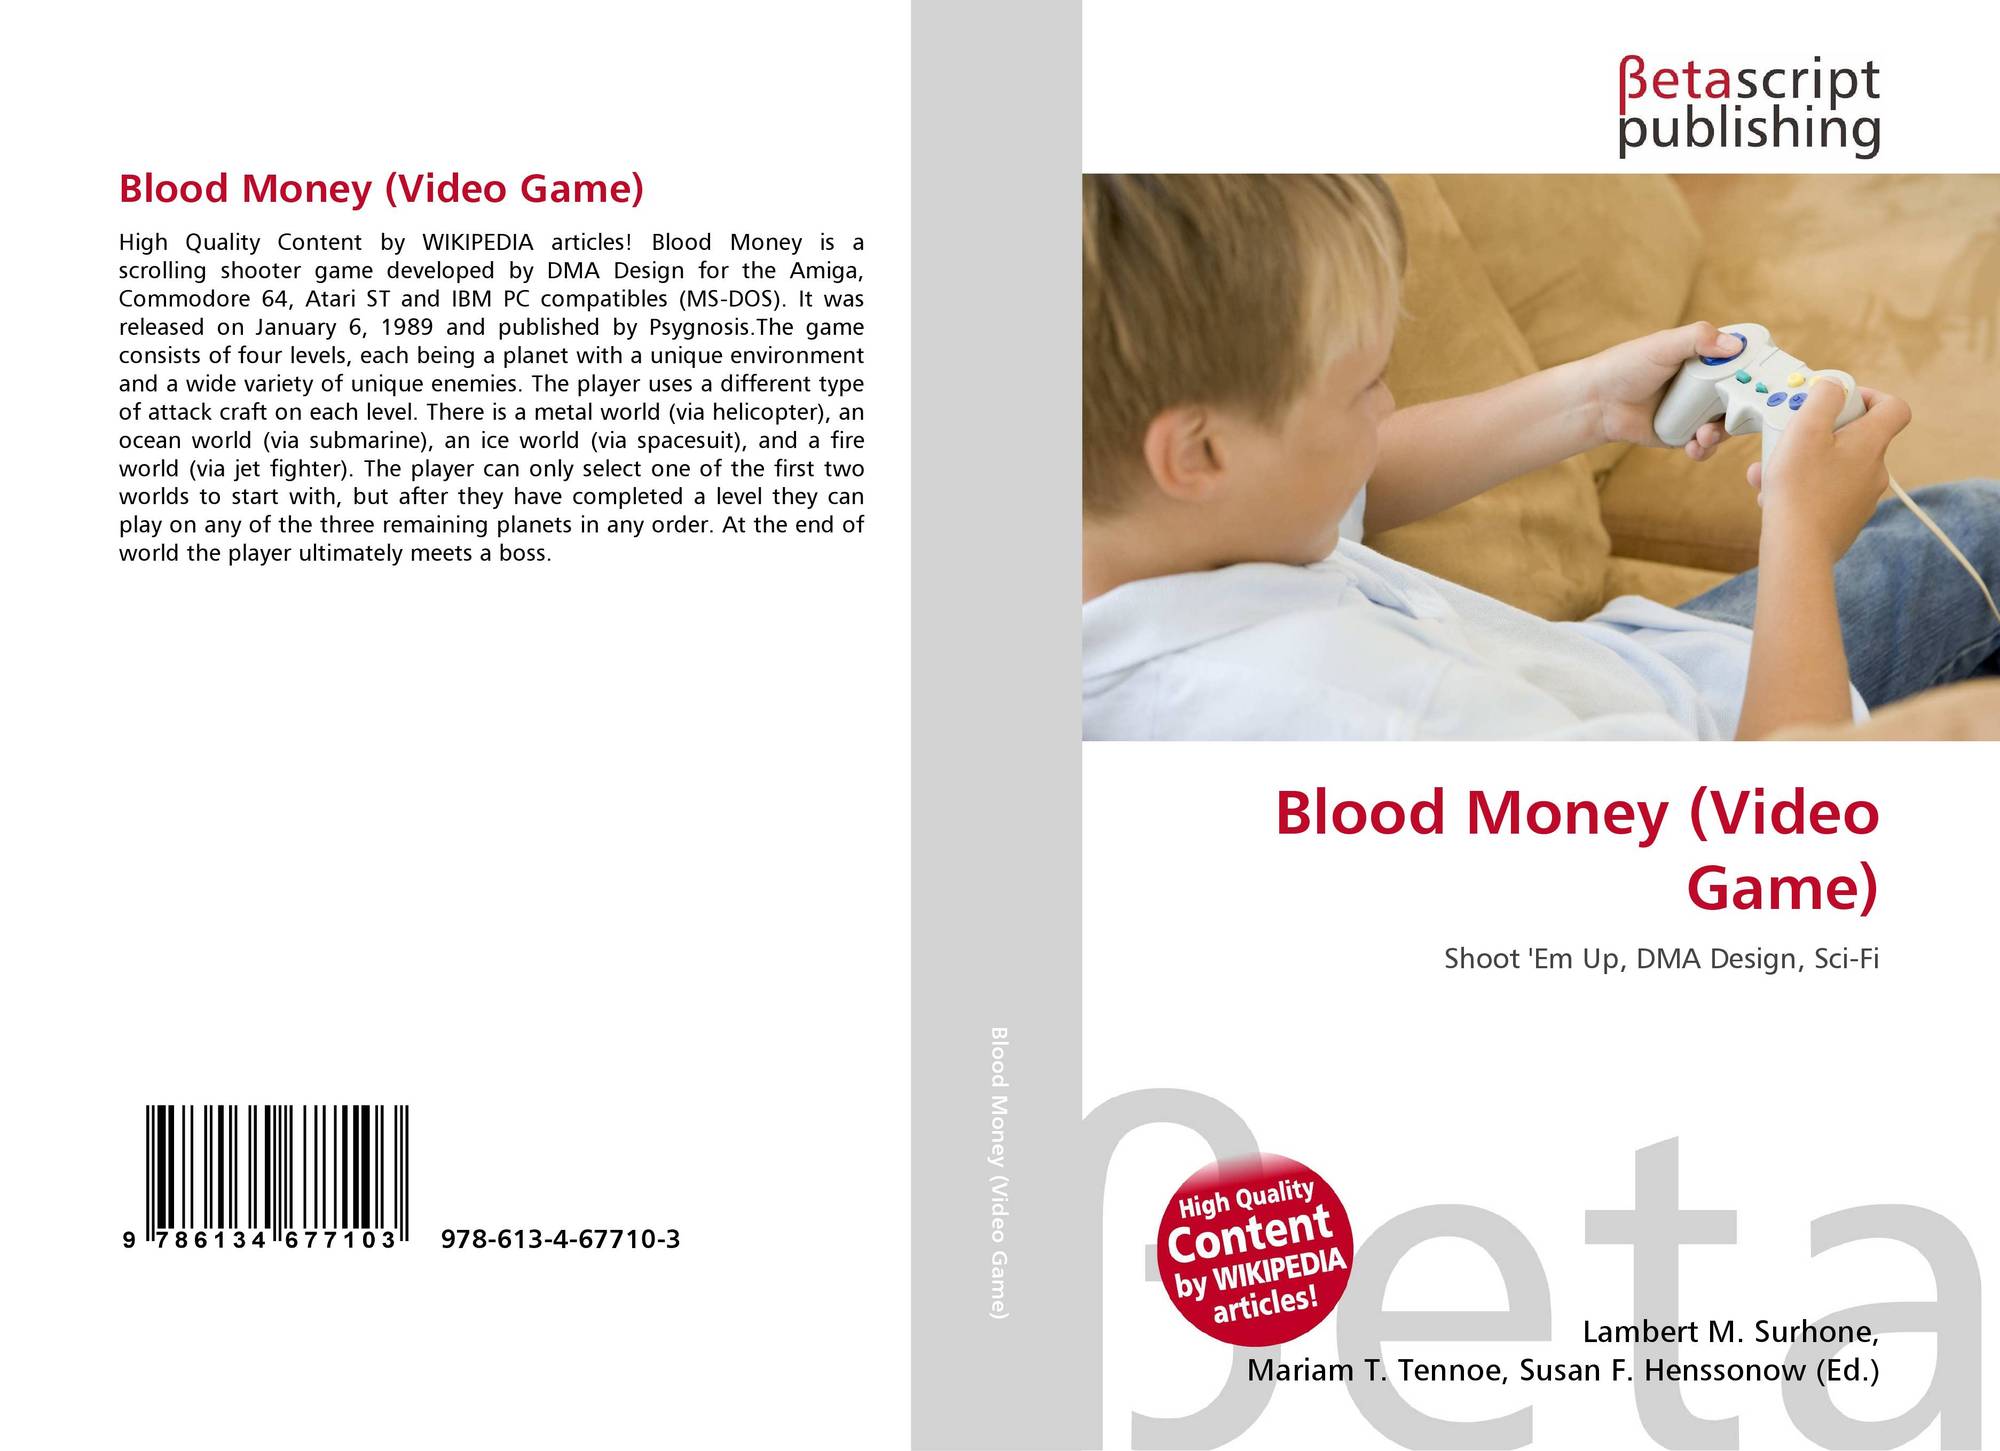 Blood Money Video Game 978 613 4 67710 3 6134677108 9786134677103 - bookcover of blood money video game 9786134677103